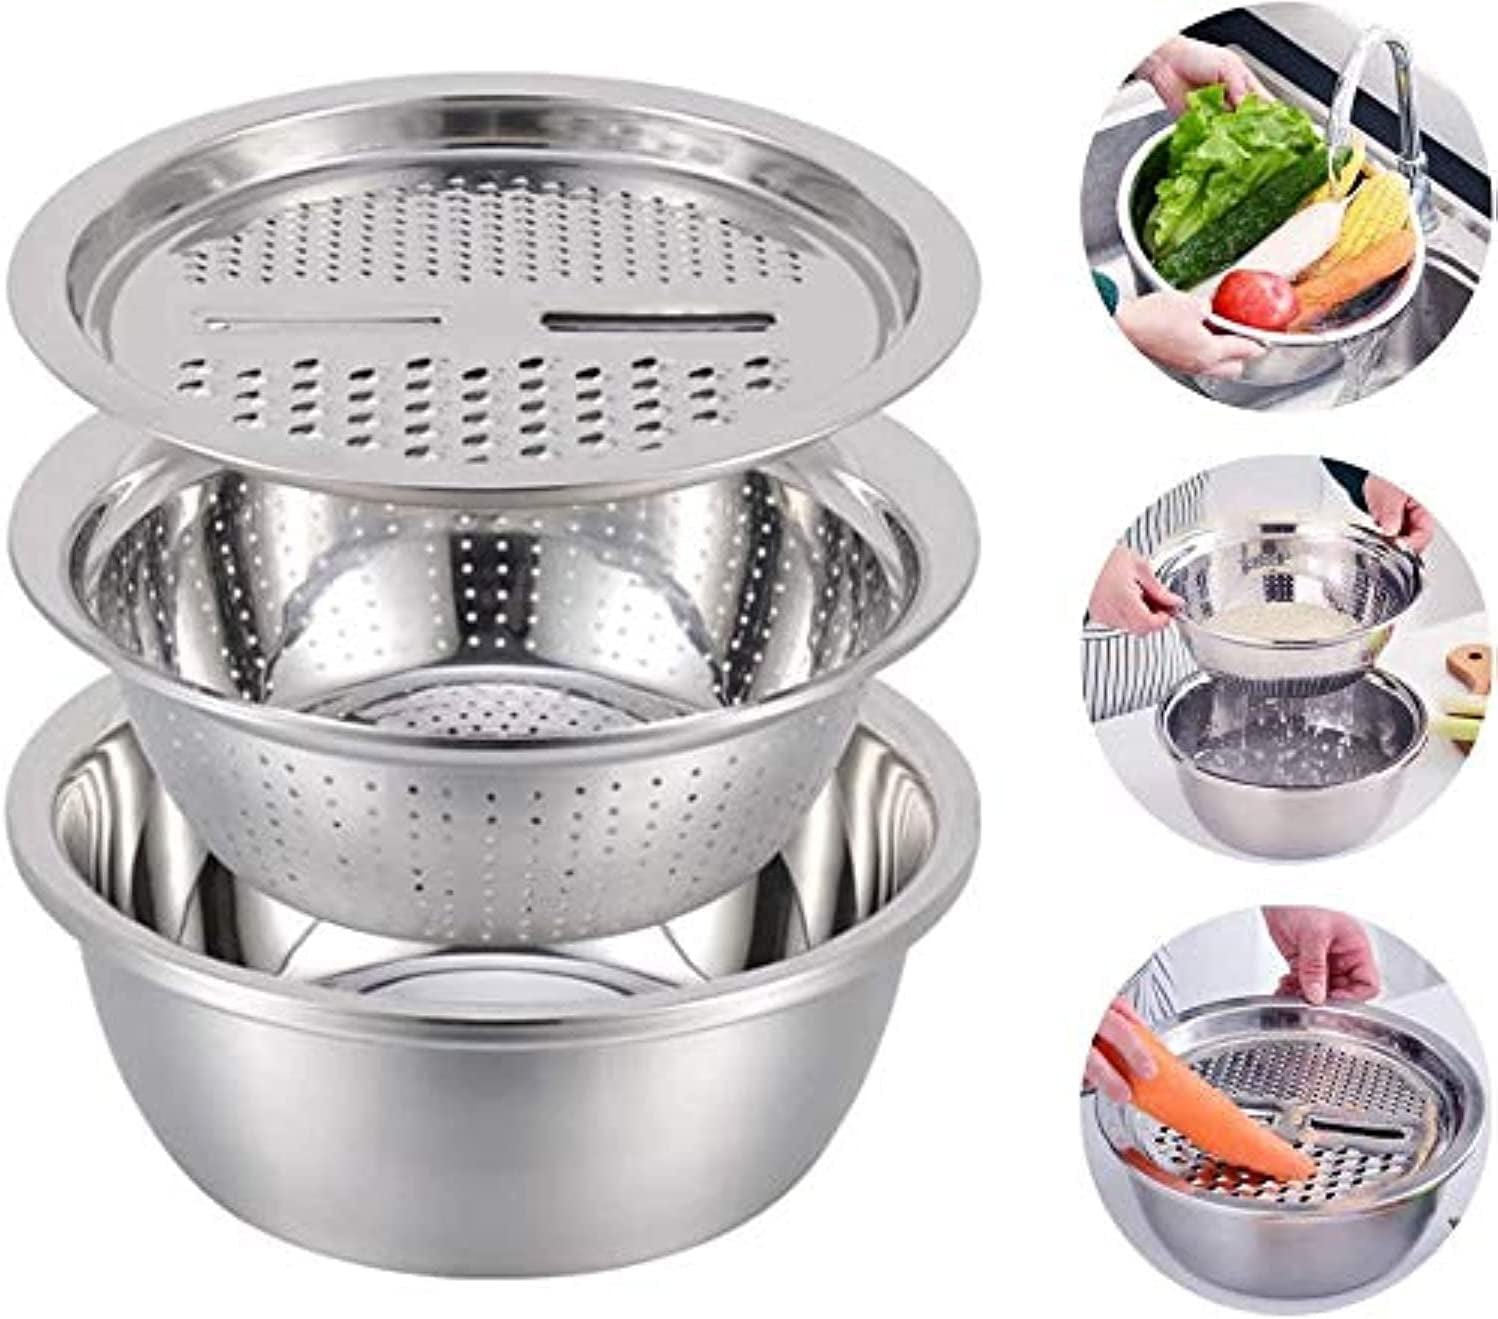 High Quality Grater Set With Bowl